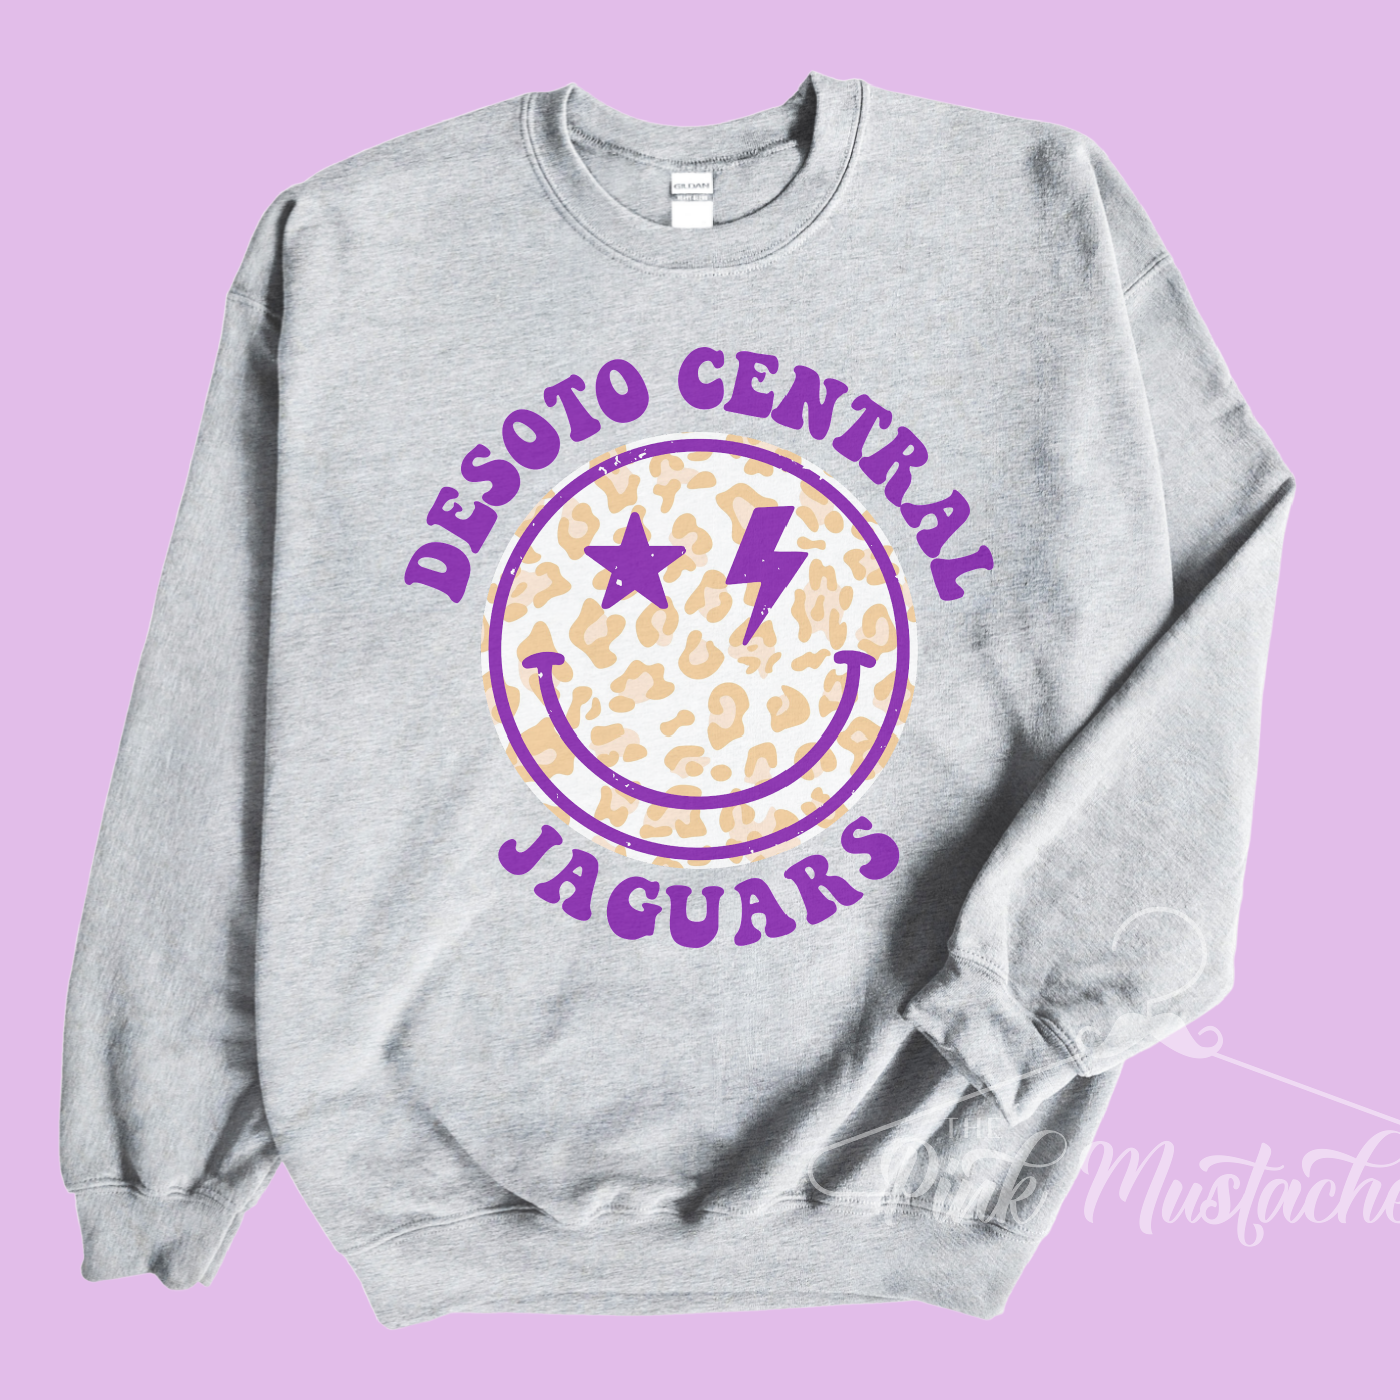 Desoto Central Jaguars Distressed Smiley Unisex Sweatshirt / Toddler, Youth, and Adult Sizes/ Lewisburg -Desoto County Schools / Mississippi School Shirt